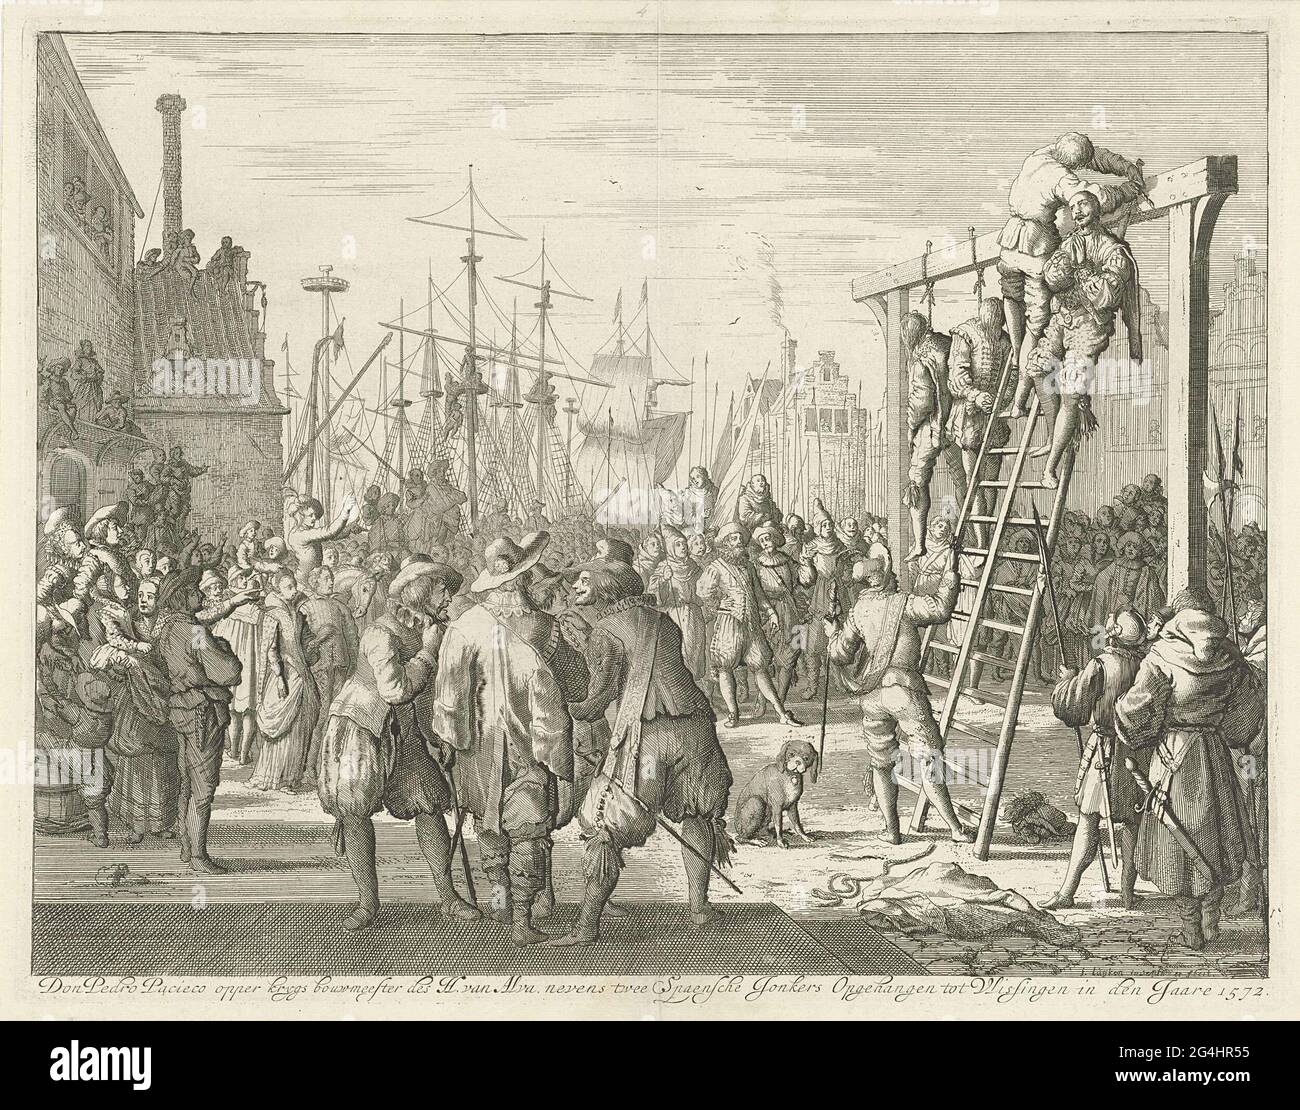 . Don Pedro (or Fernando) Pacieco, Martial Building master (Engineer) of the Duke of Alva is hung with two other Spaniards in Vlissingen, April 8, 1572. With many spectators, in the background the masts of the ships on the quay. Stock Photo